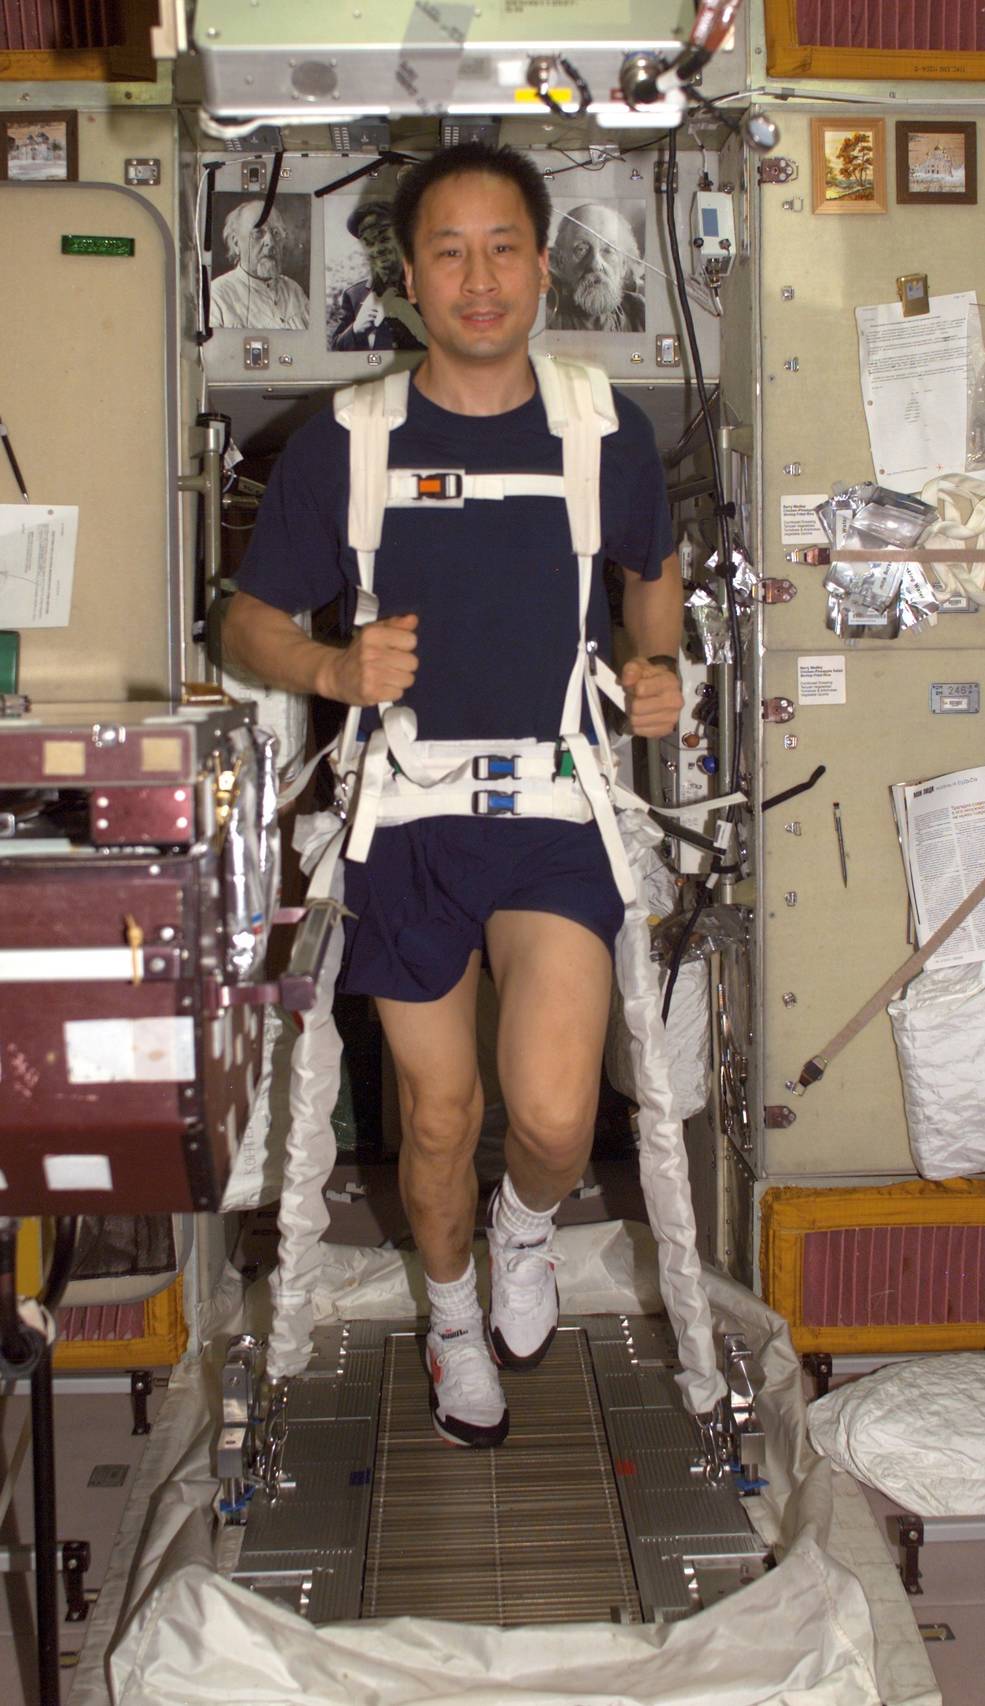 aapi_2021_8_exp_7_lu_running_on_treadmill_he_helped_install_during_sts_106